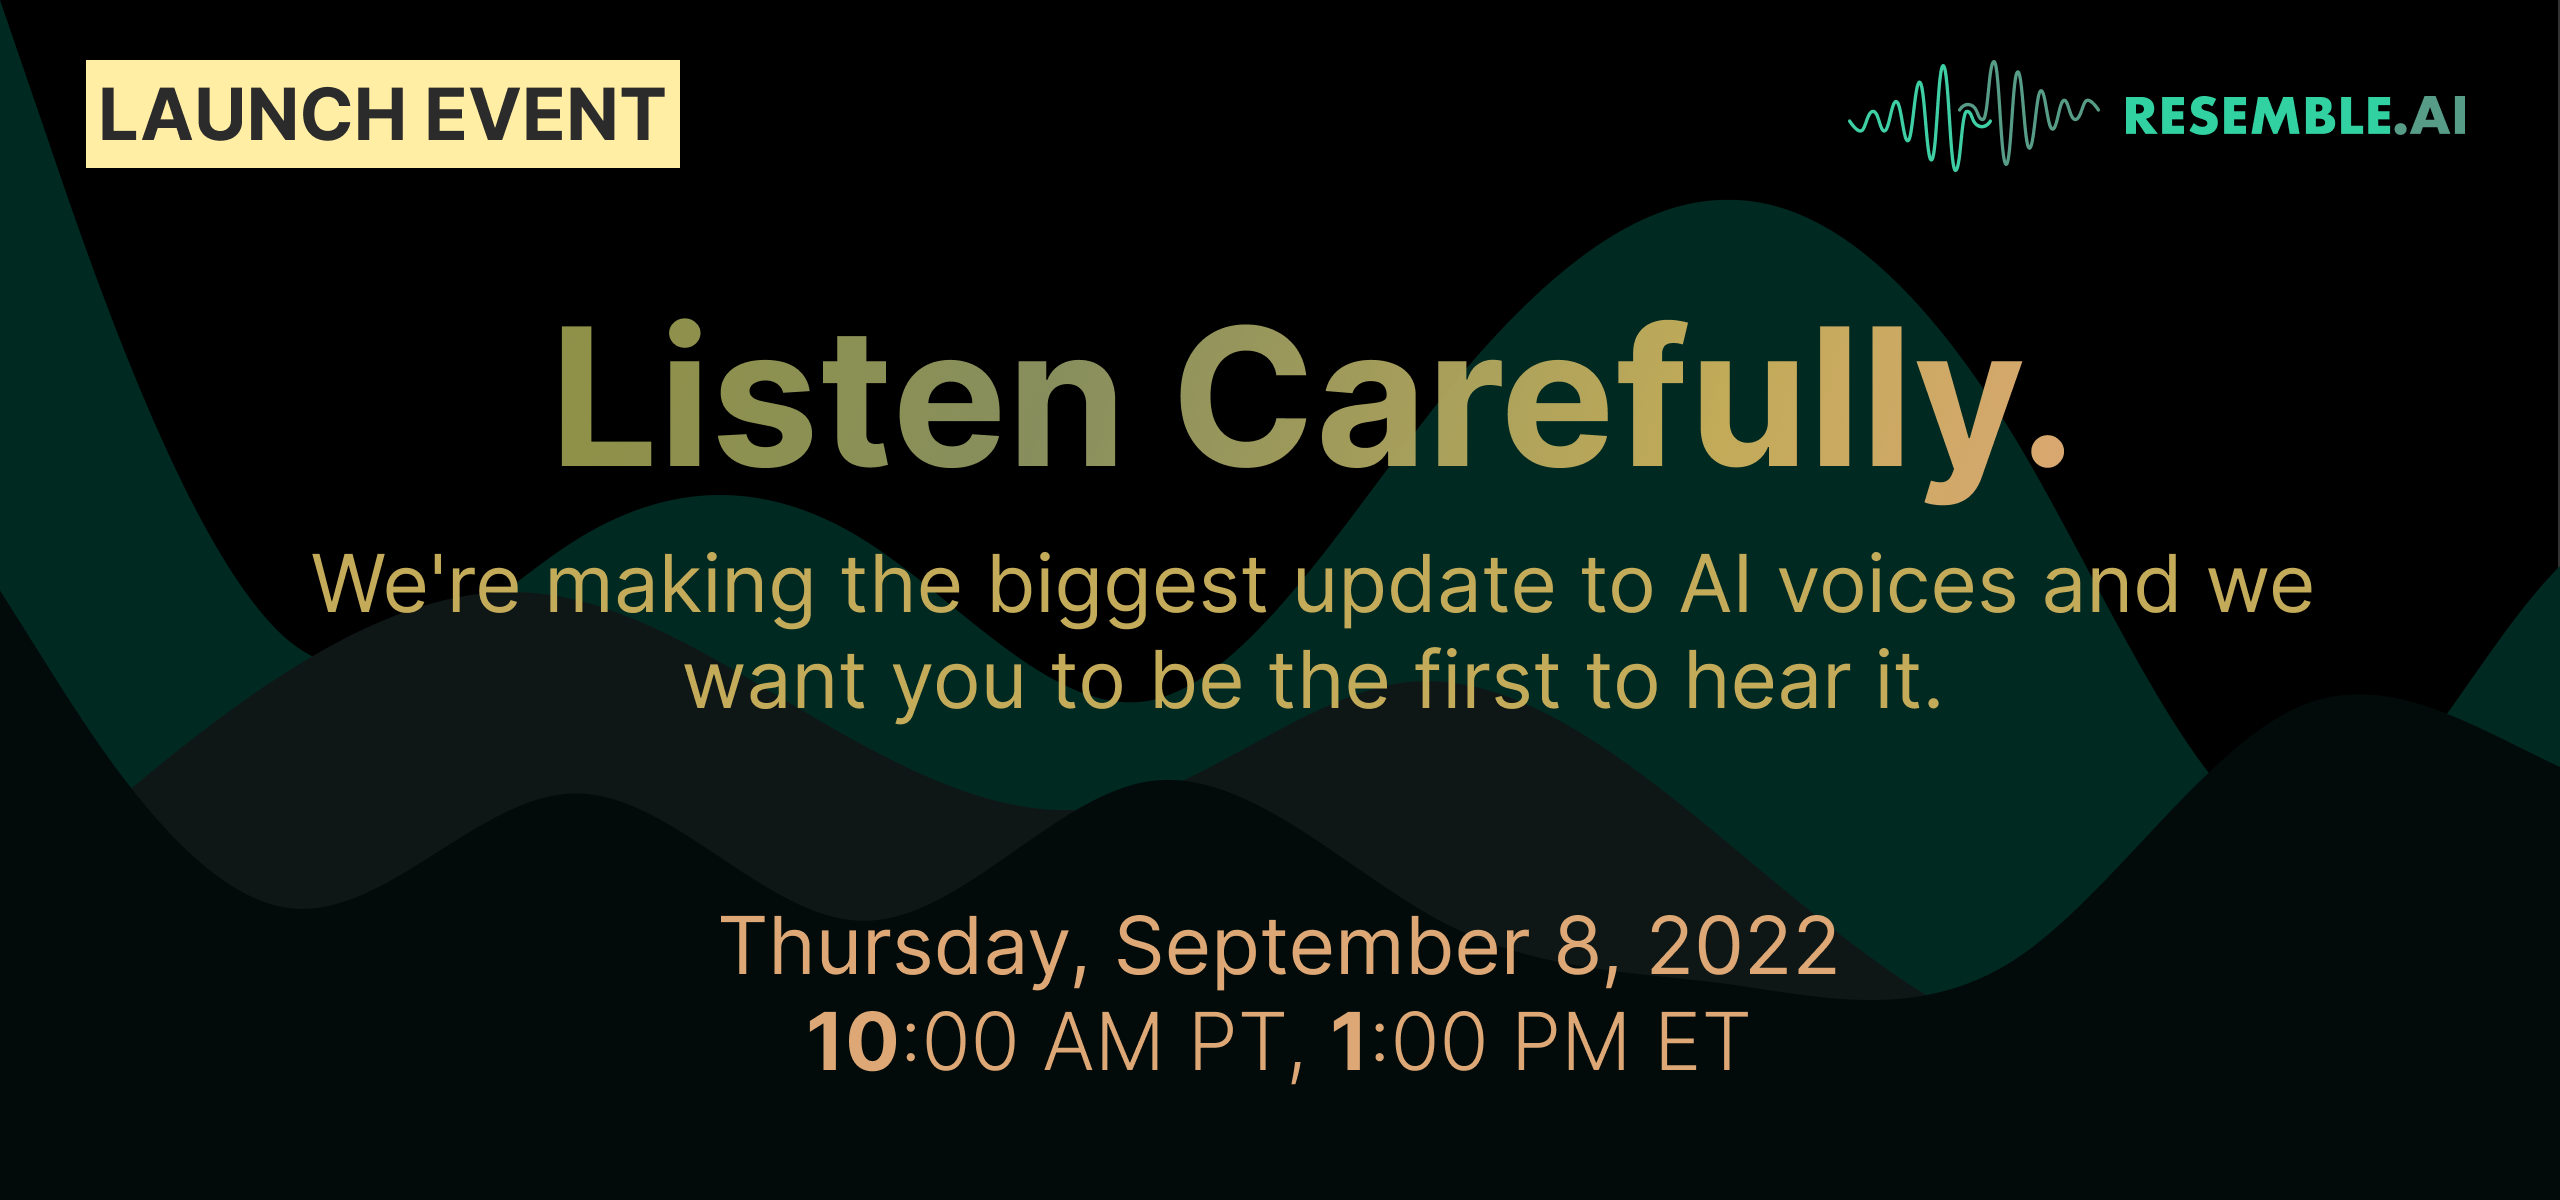 Webinar for Contact Center and Custom AI Voices.